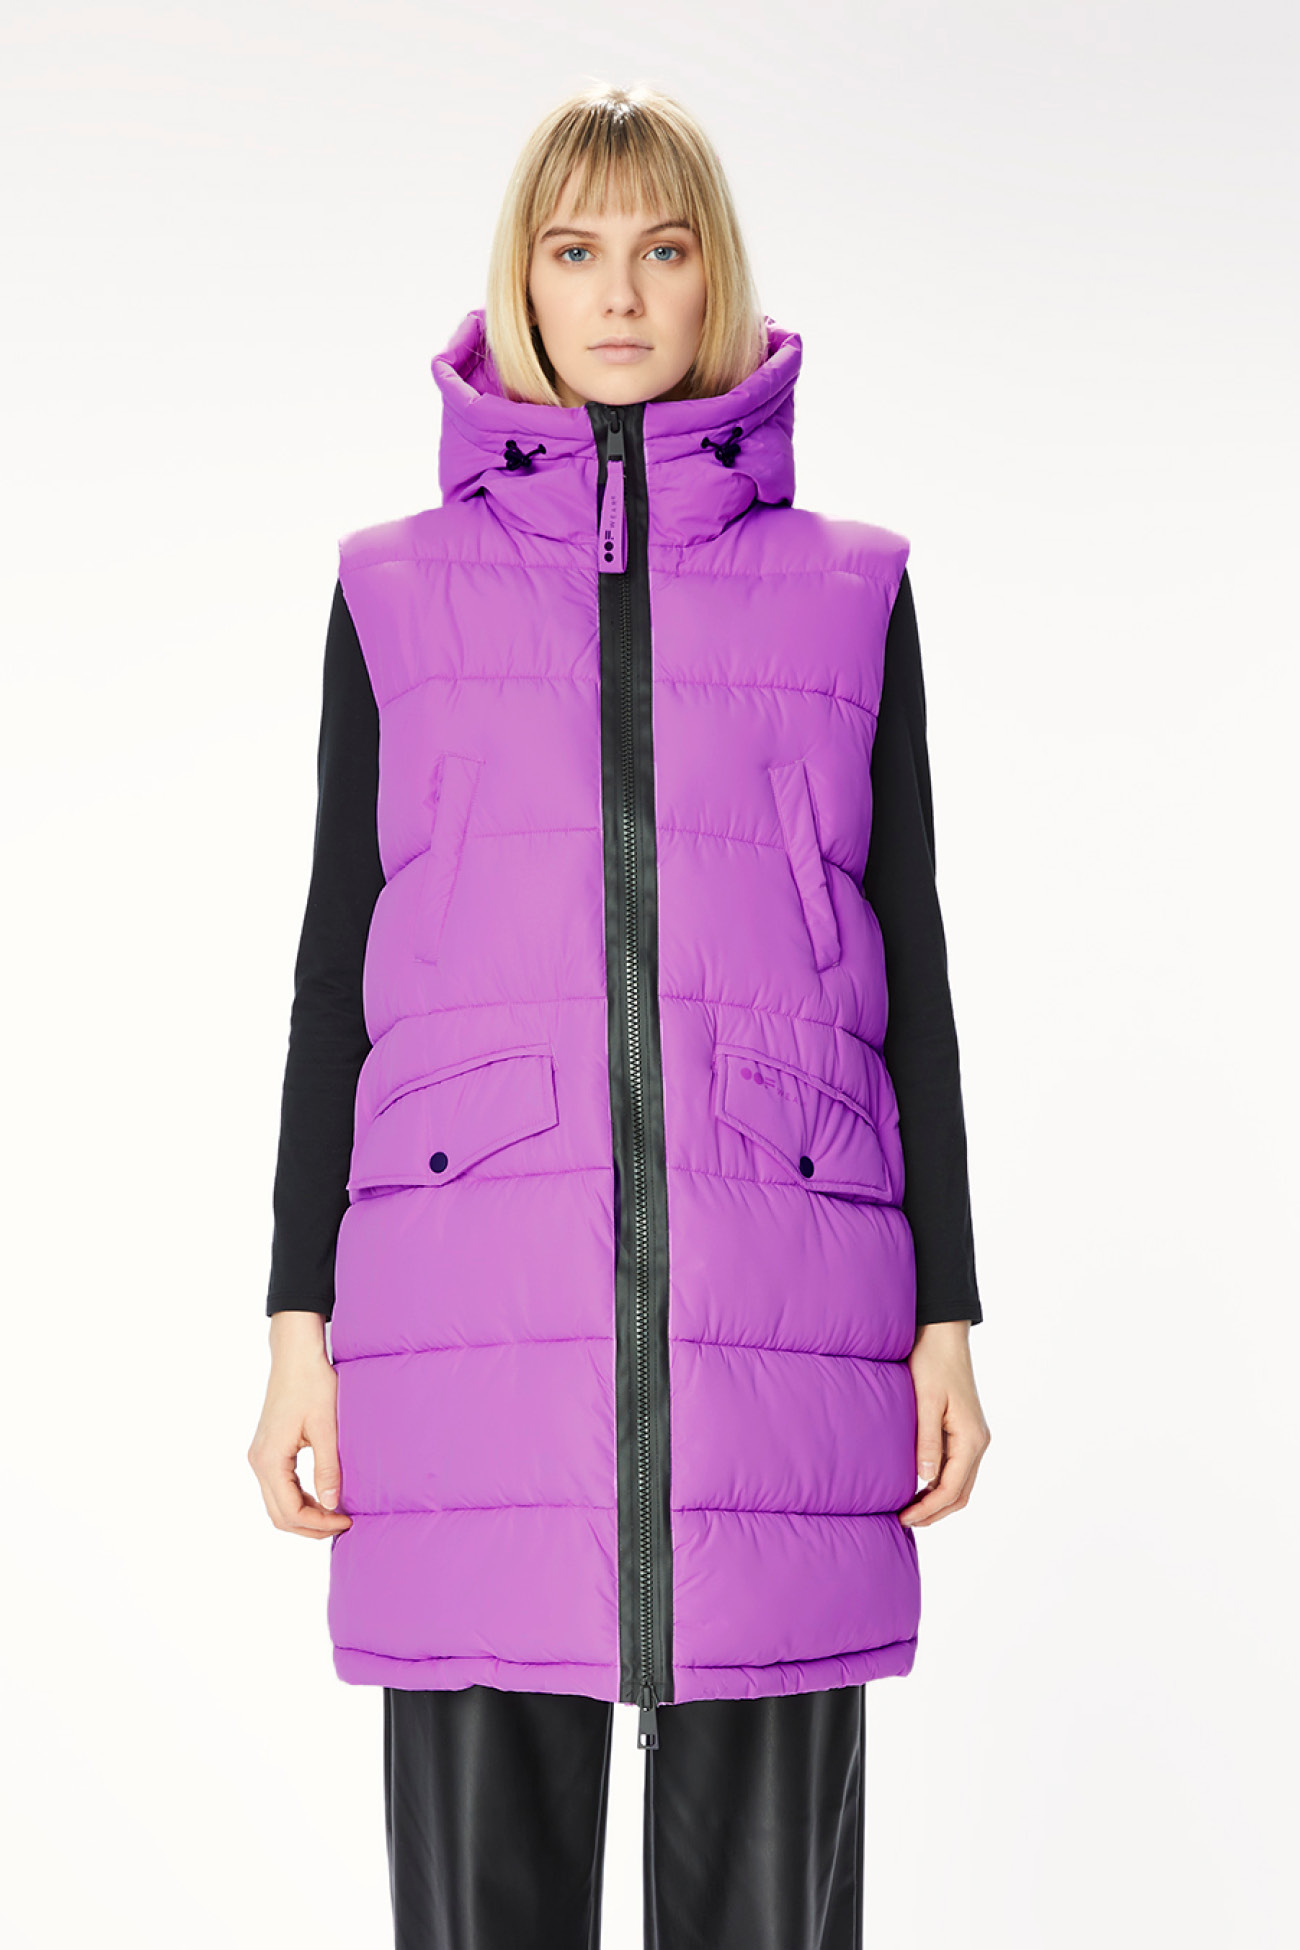 JACKET 9099 MADE IN WATER RESISTANT NYLON - ORCHID - OOF WEAR